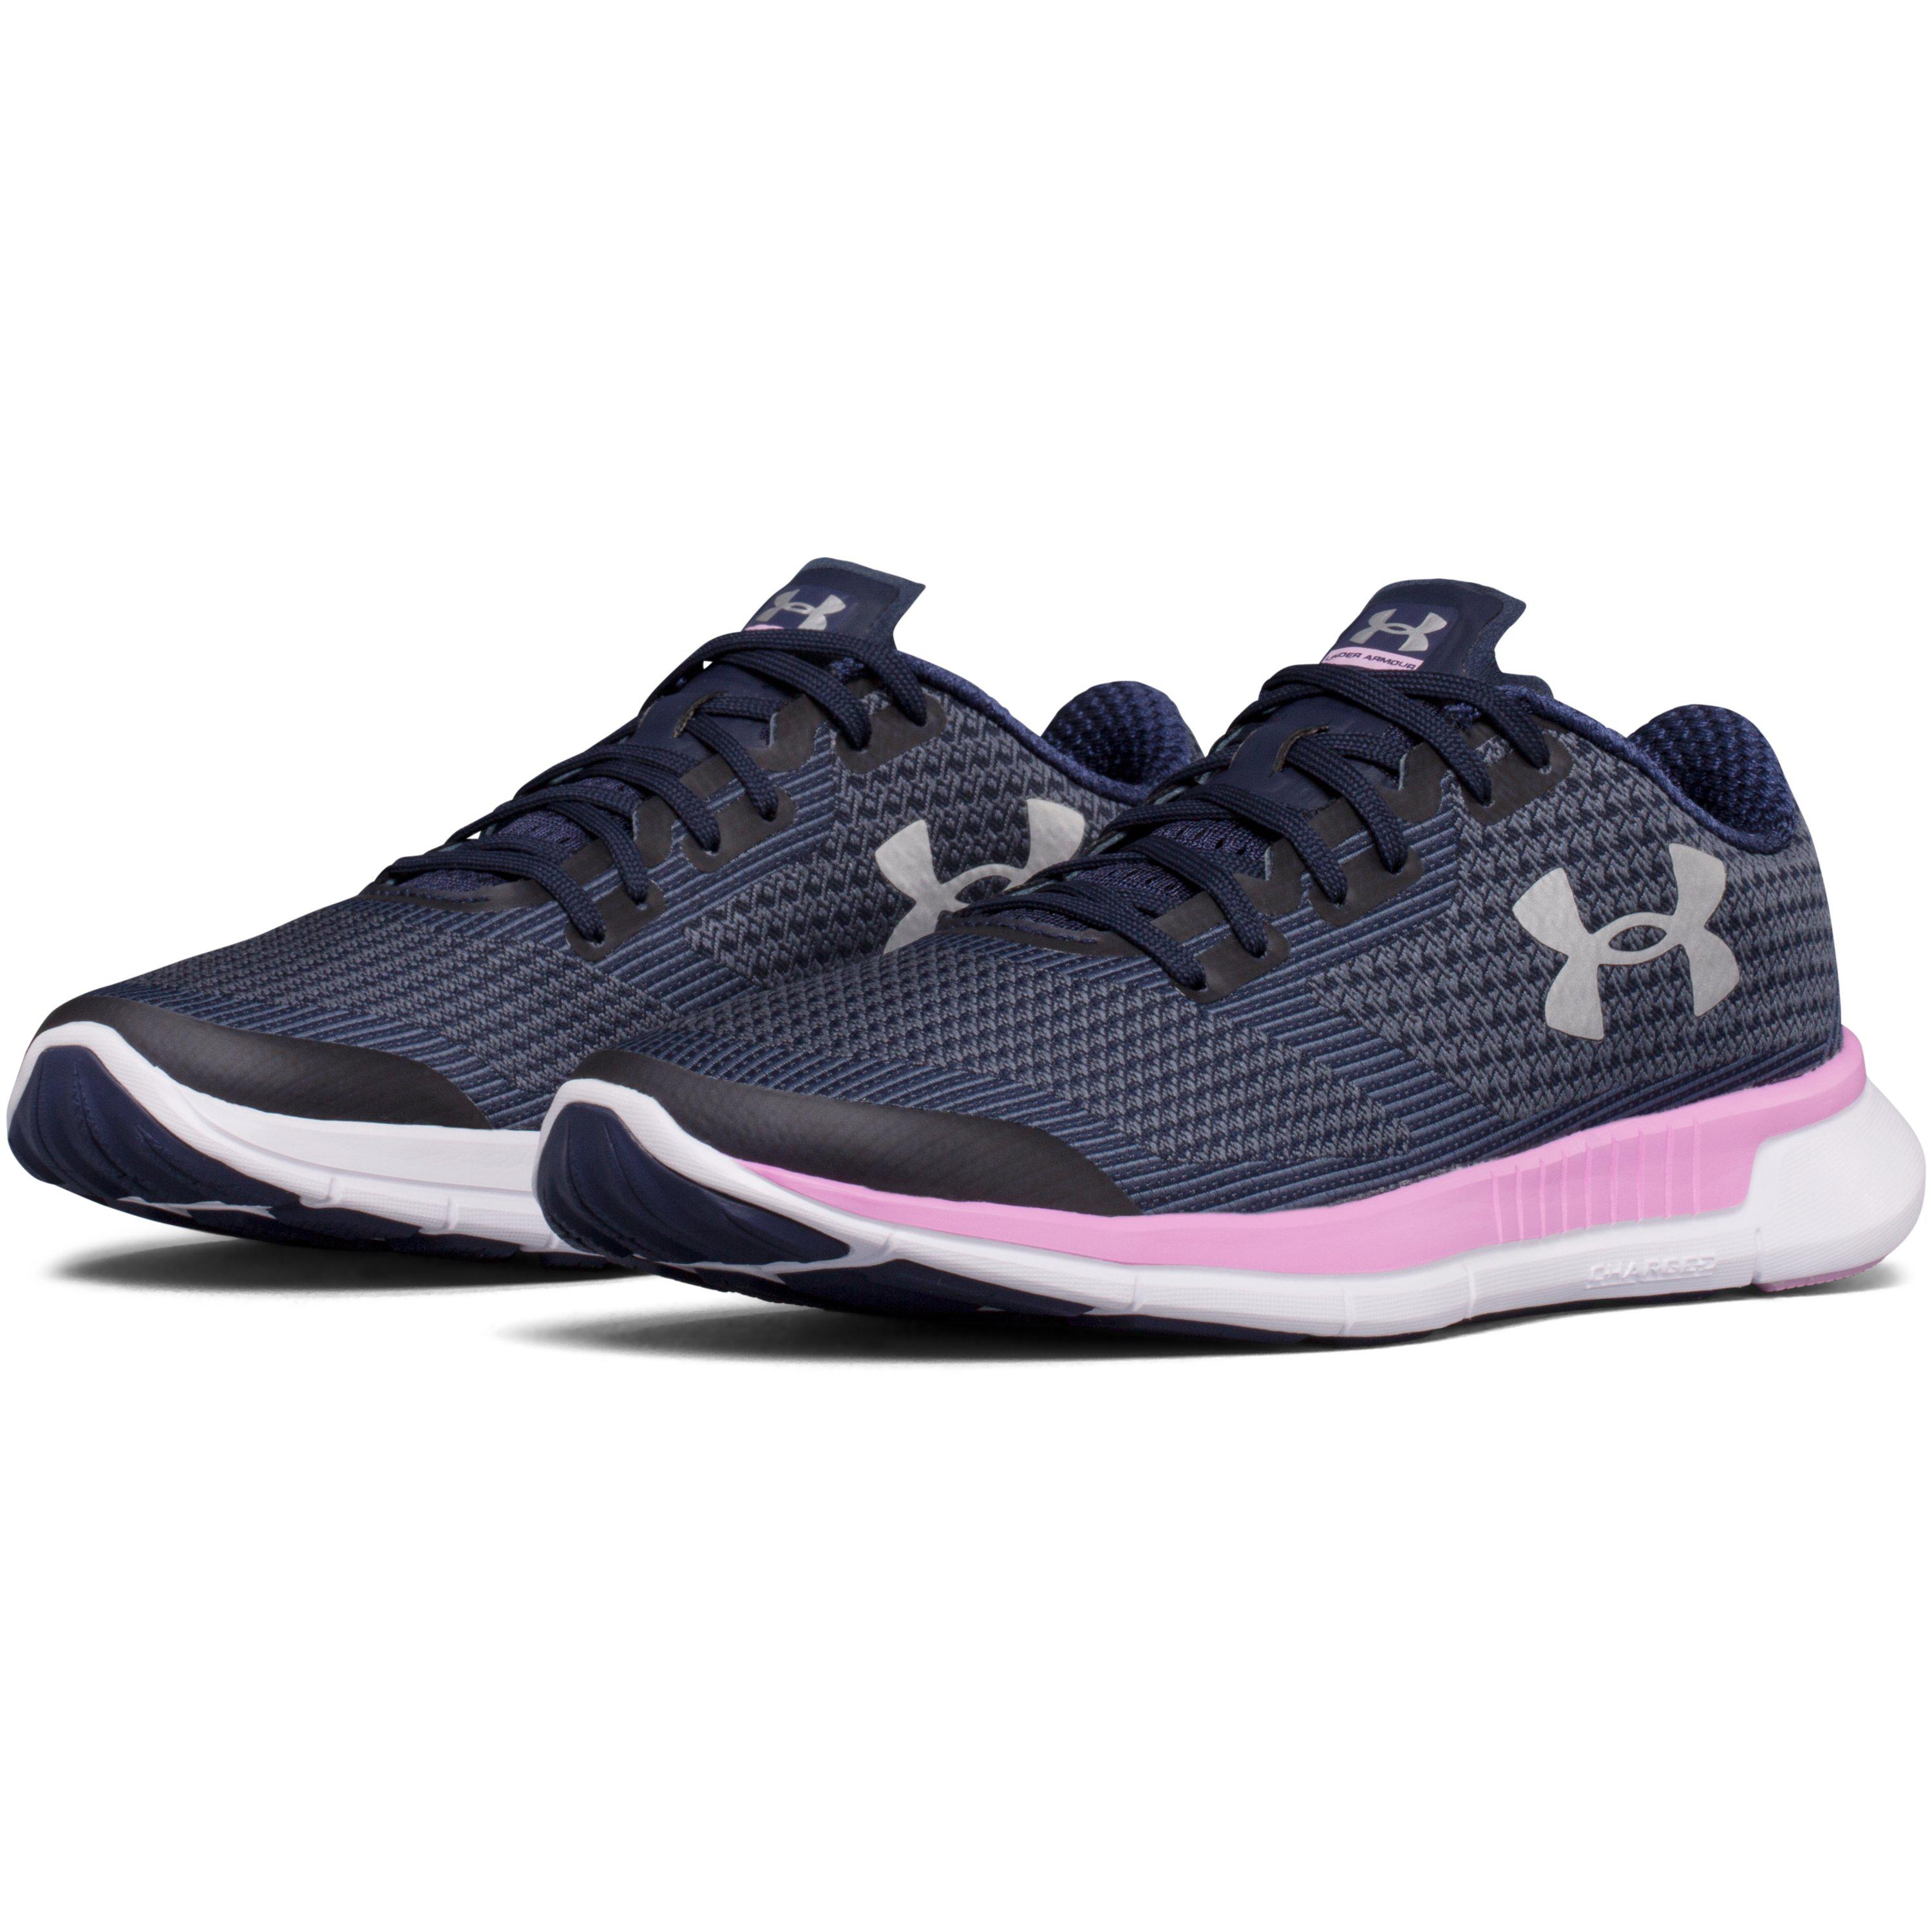 Under Armour Rubber Women's Ua Charged Lightning Running Shoes in Blue ...